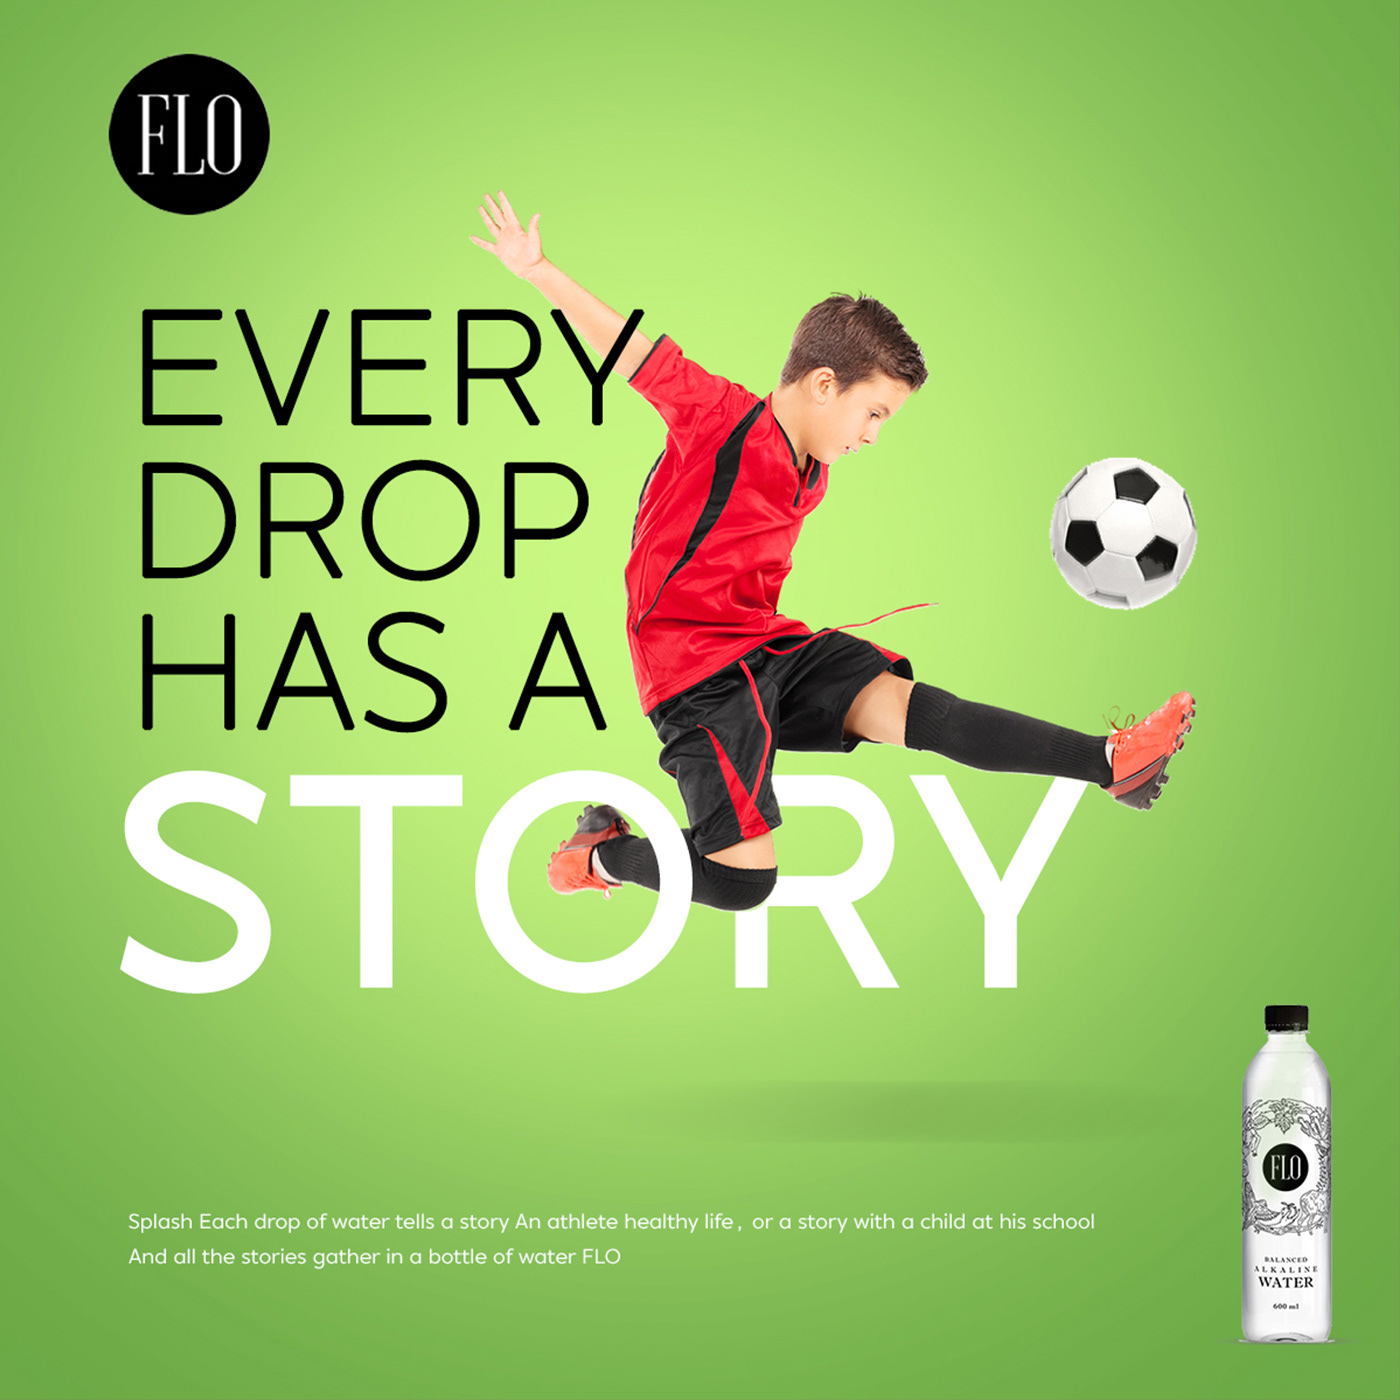 creative Nature water ad campaign ads flo Fly holidays Outdoor Socialmedia